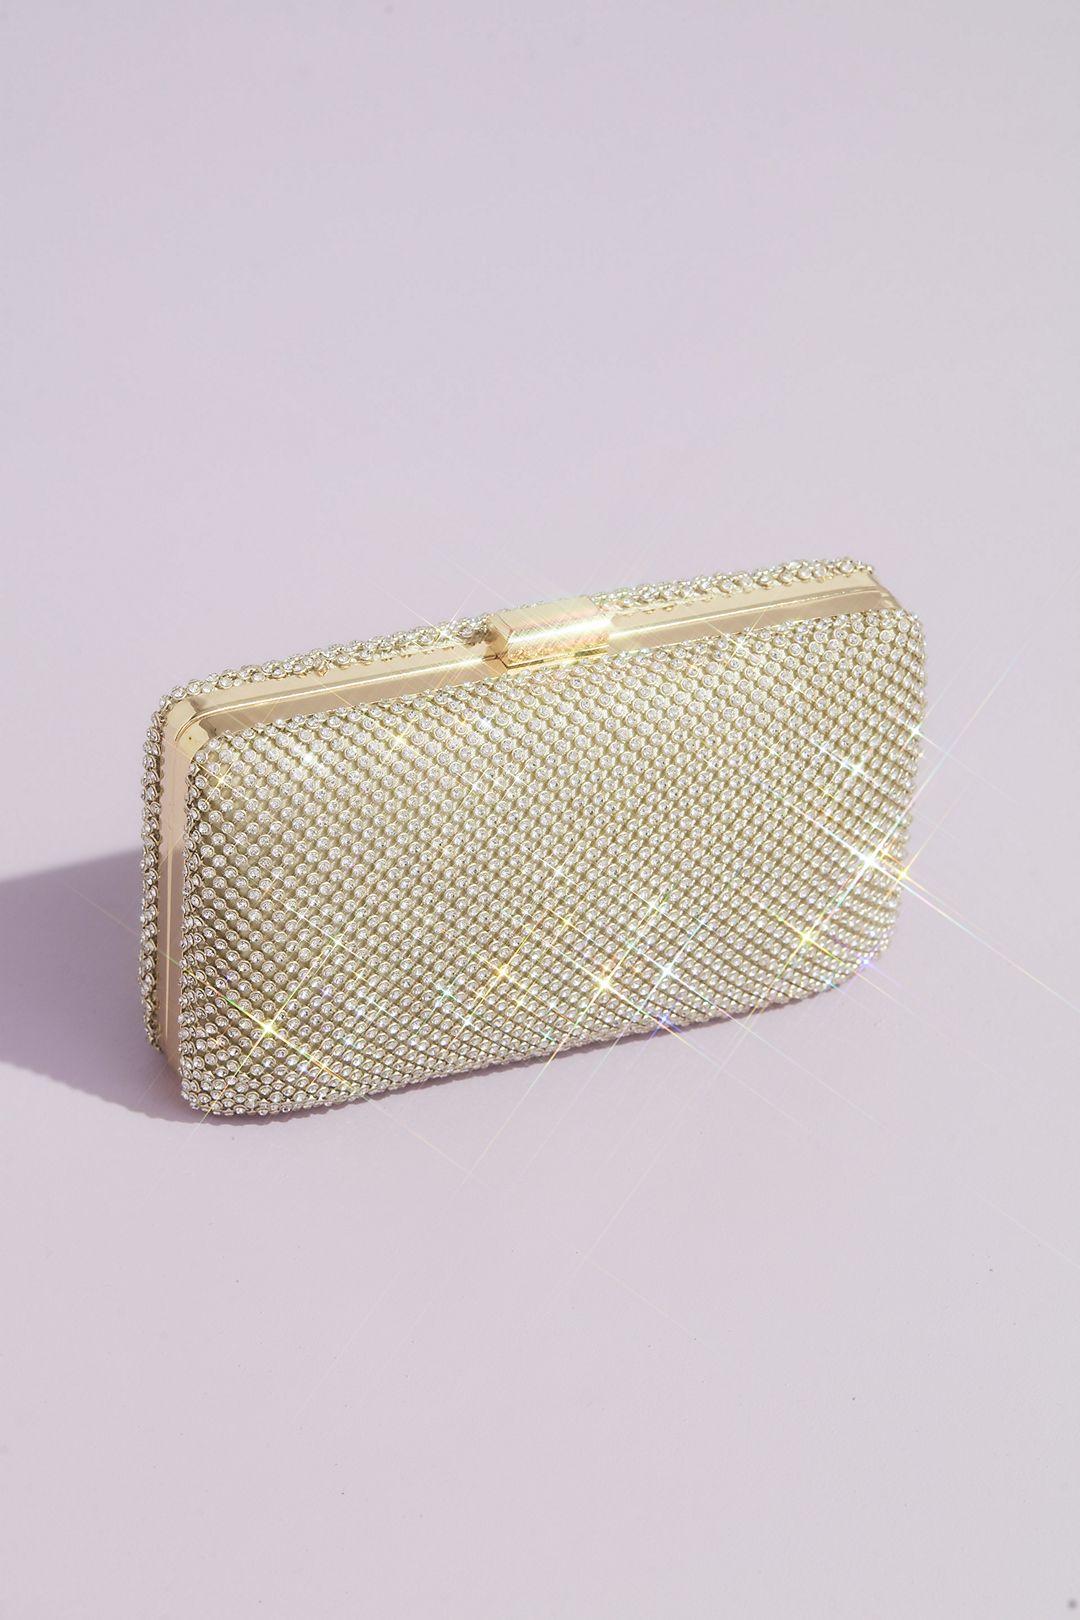 Crystal Minaudiere Evening Clutch with Chain Strap Image